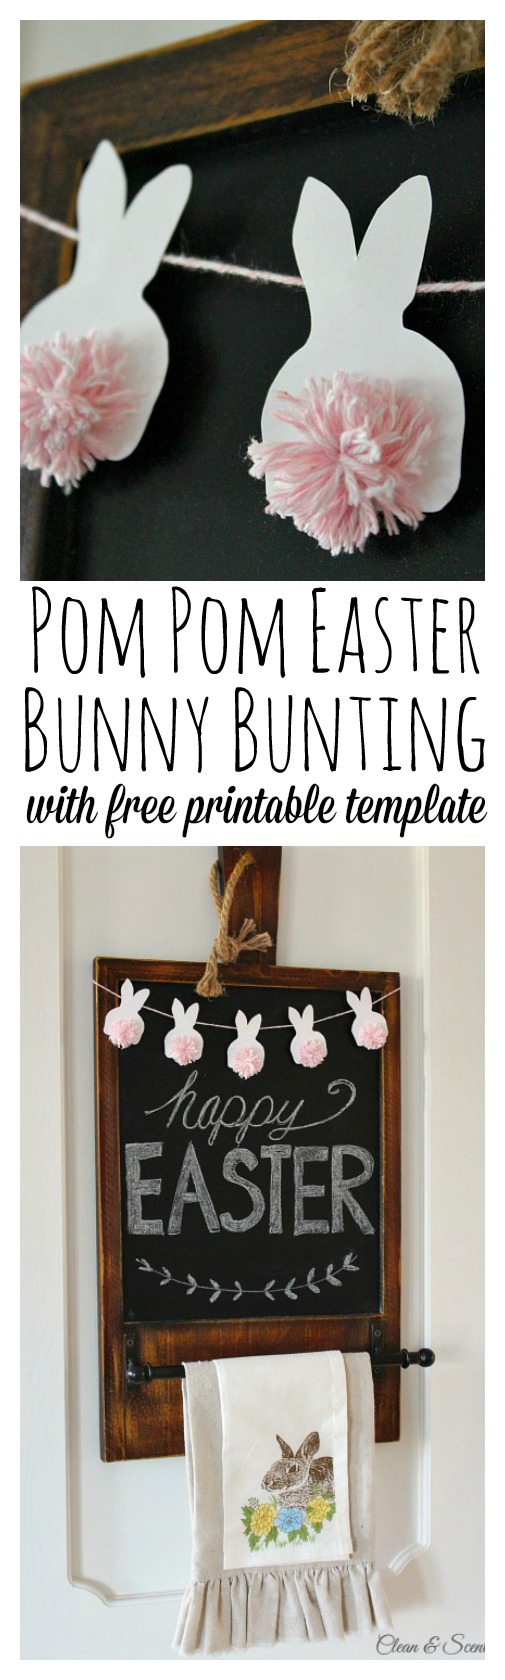 Adorable Easter bunny bunting with free template. Love those baker's twine pom pom tails! // cleanandscentsible.com